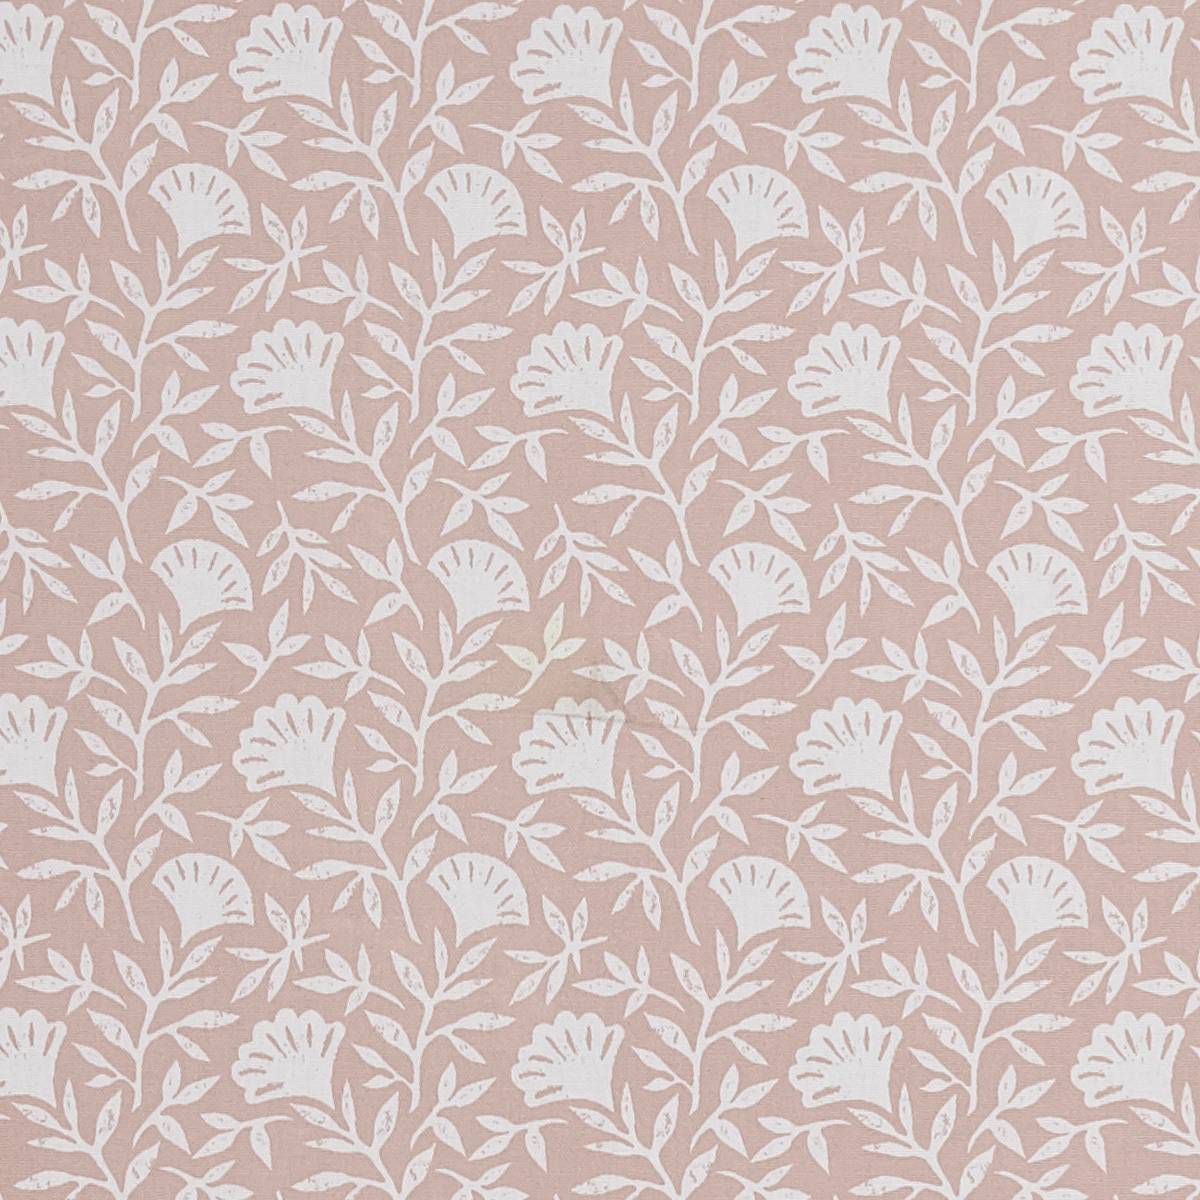 Melby Blush Fabric by Studio G